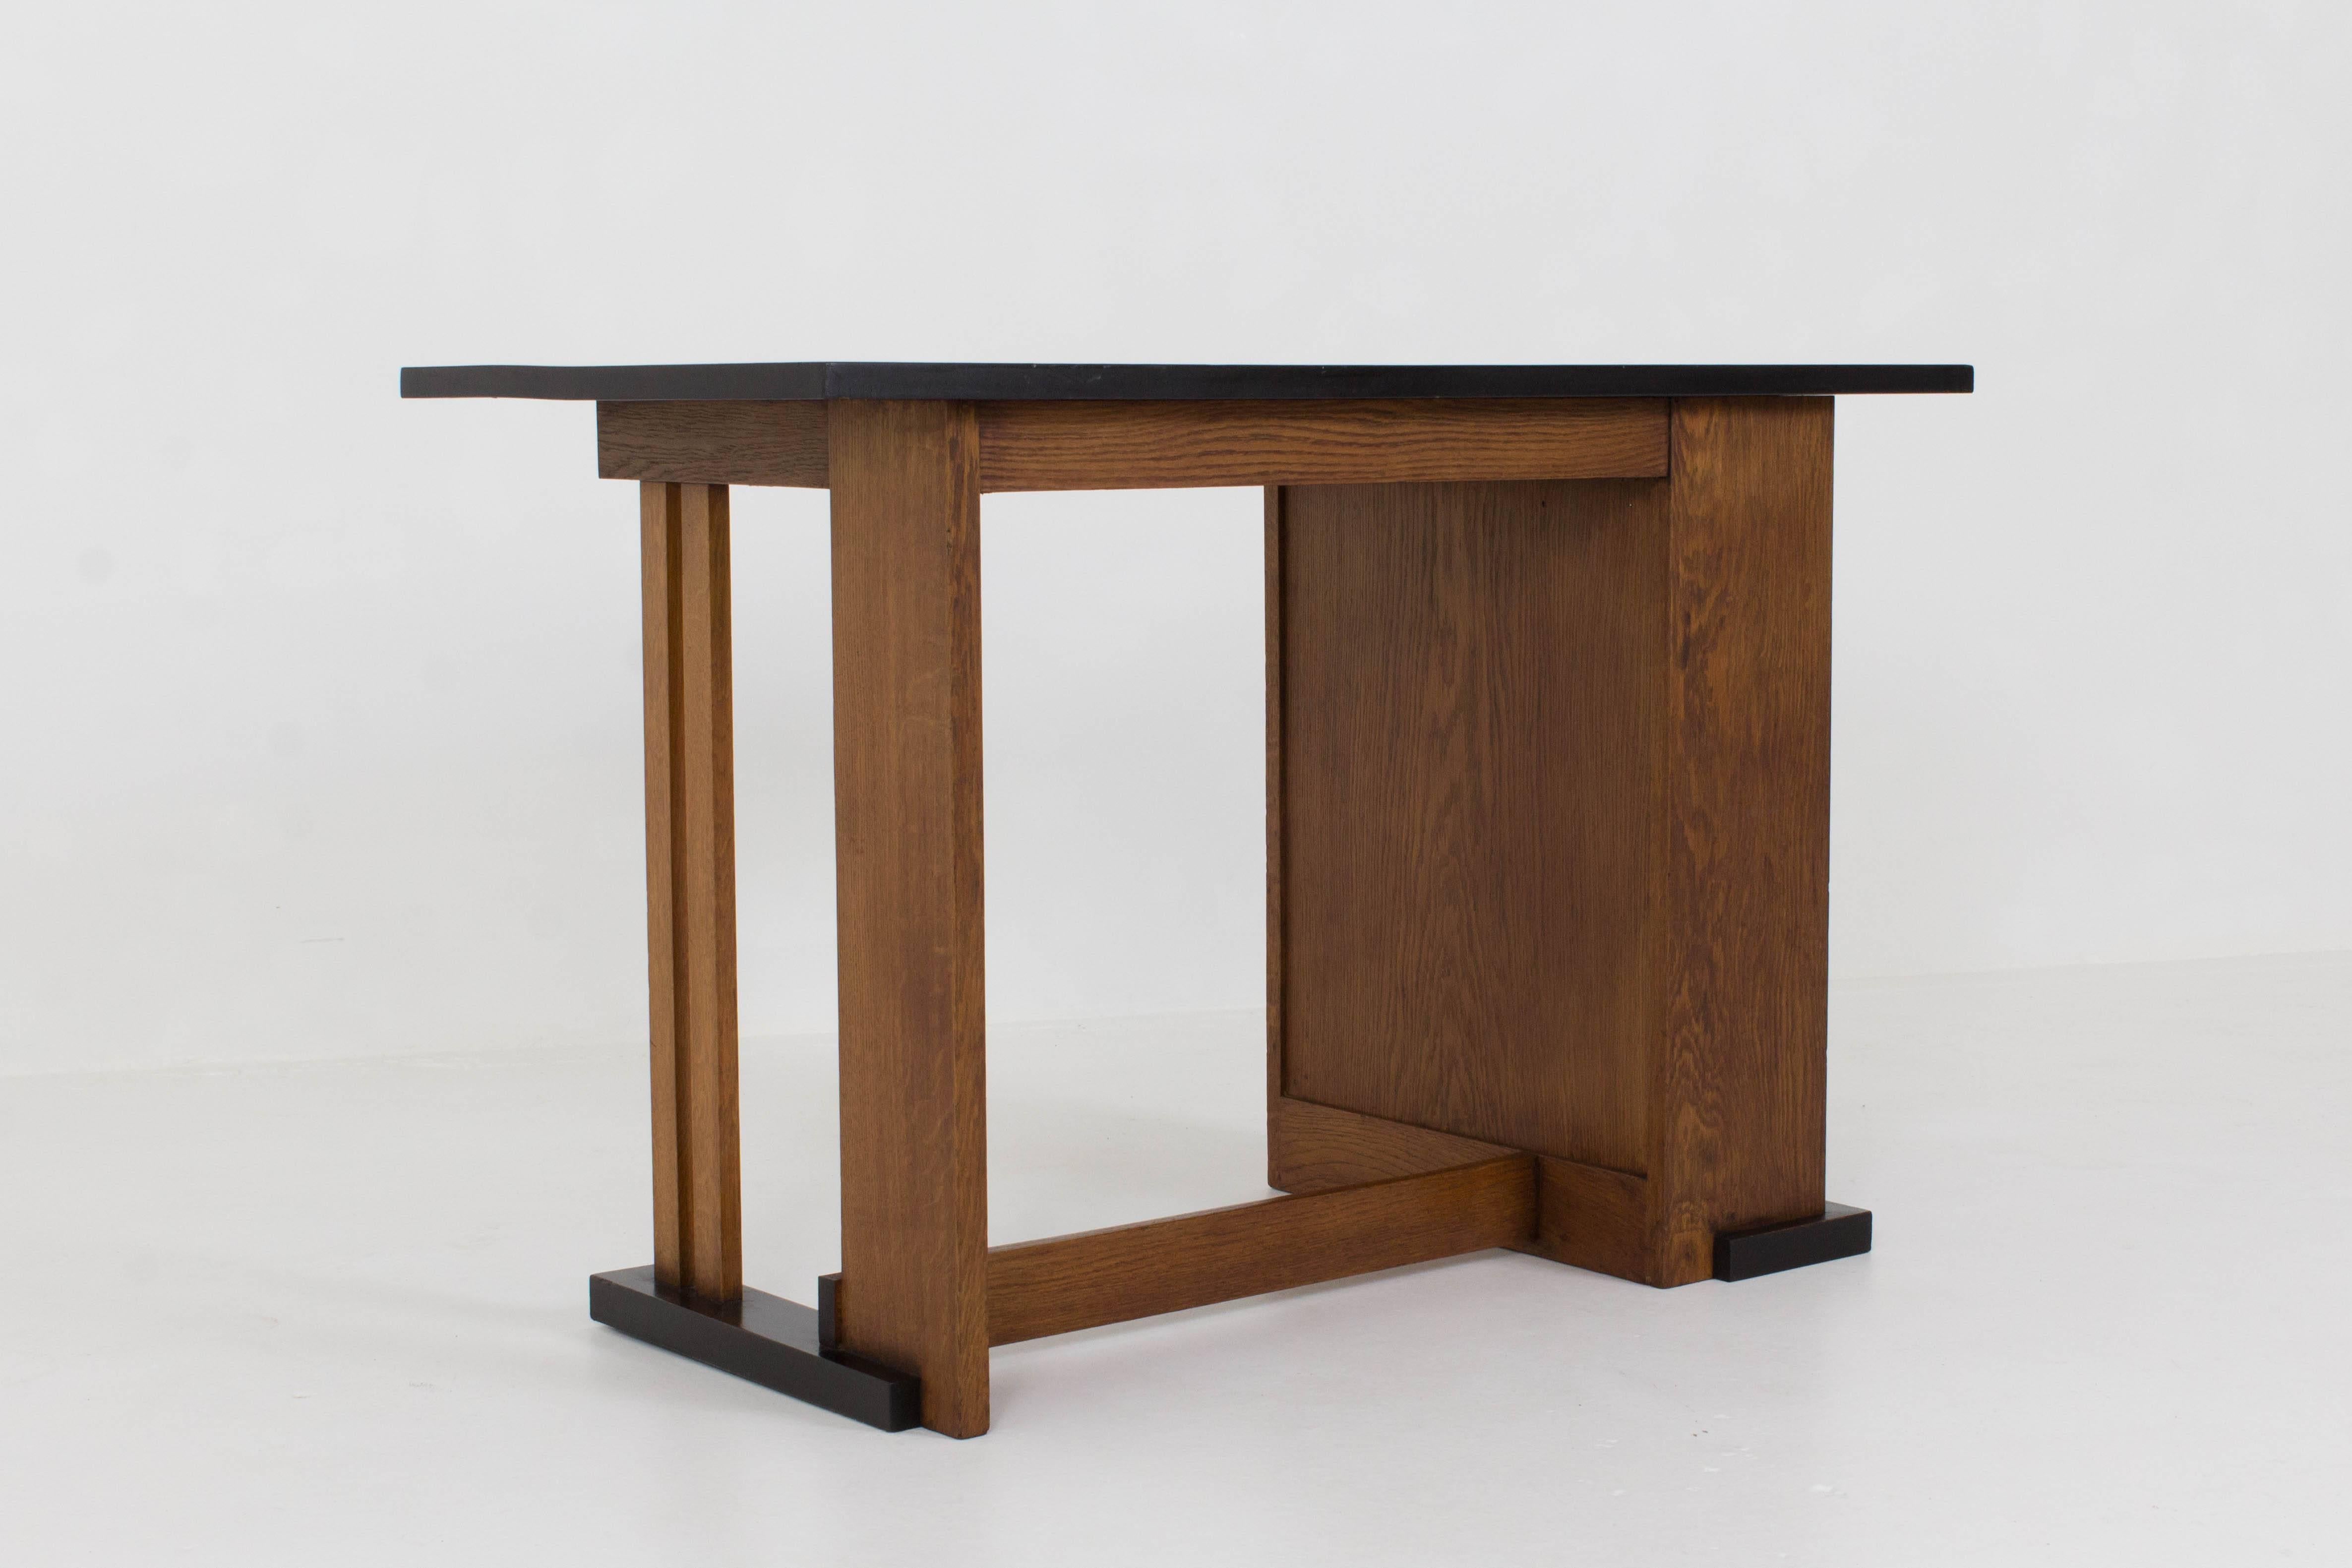 Early 20th Century Important and Rare Art Deco Haagse School Desk by Cor Alons for L.O.V.